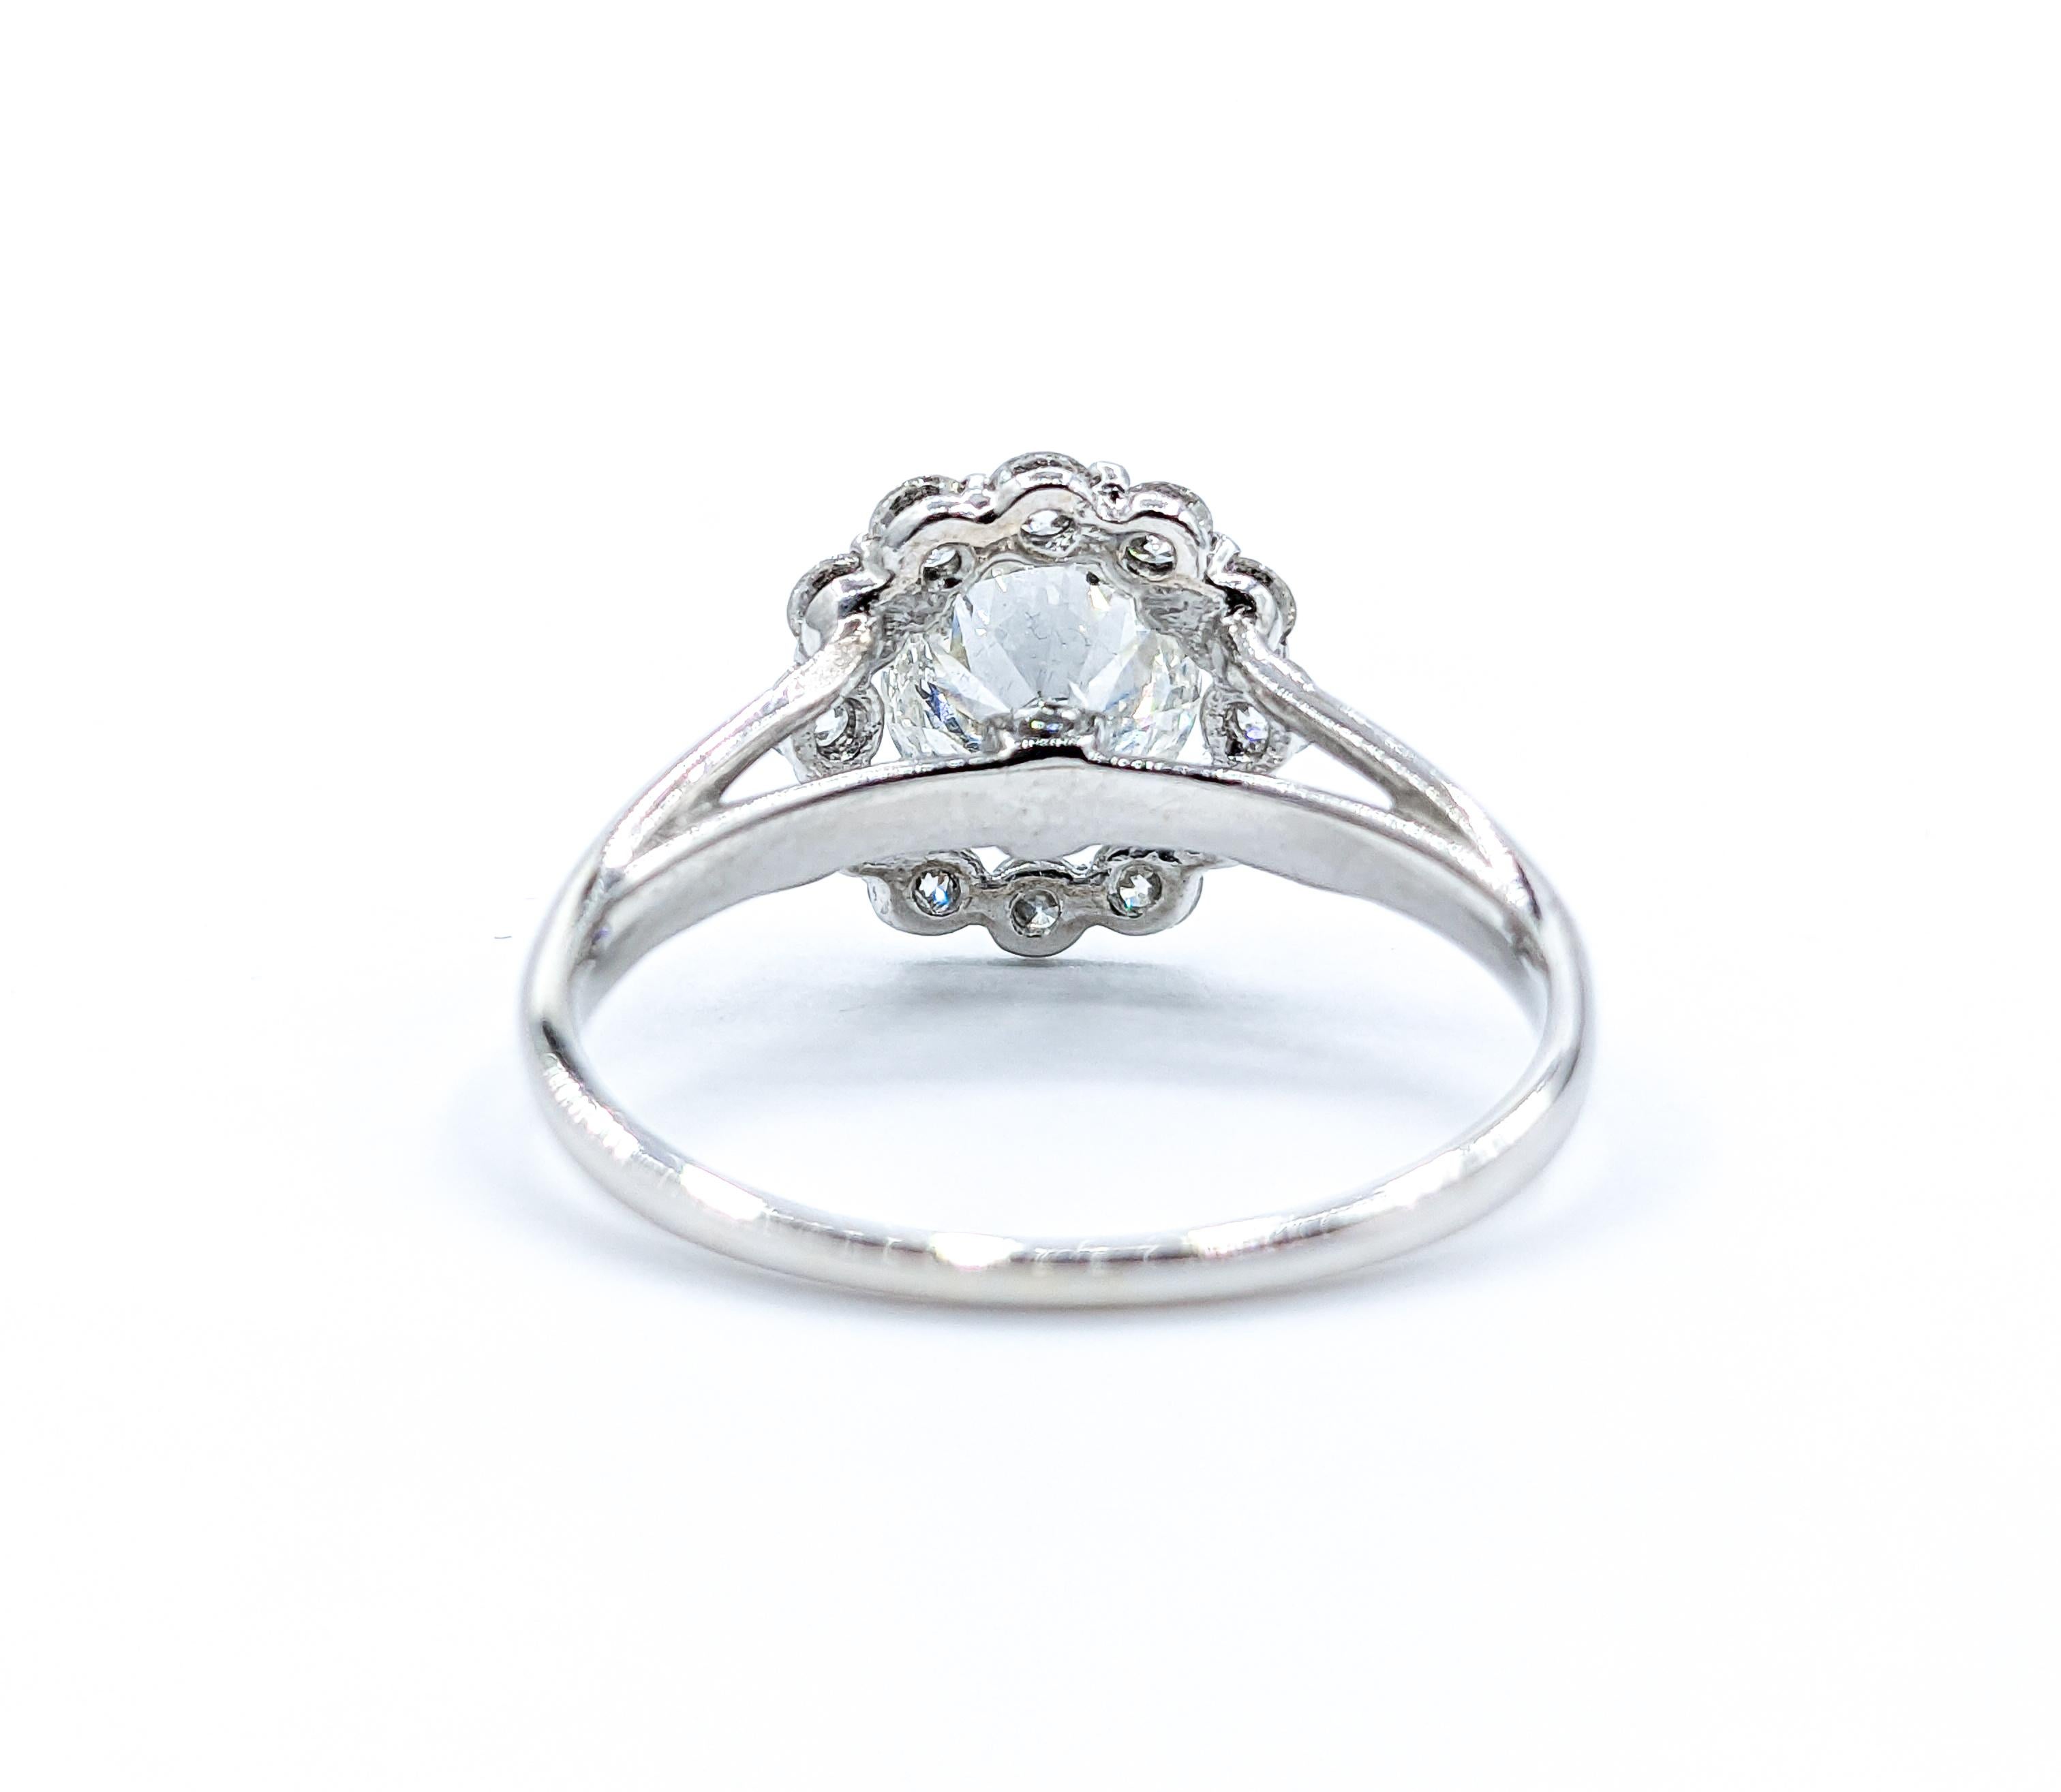 Romantic GIA .84ct Halo Engagement Ring in 18k White Gold For Sale 2